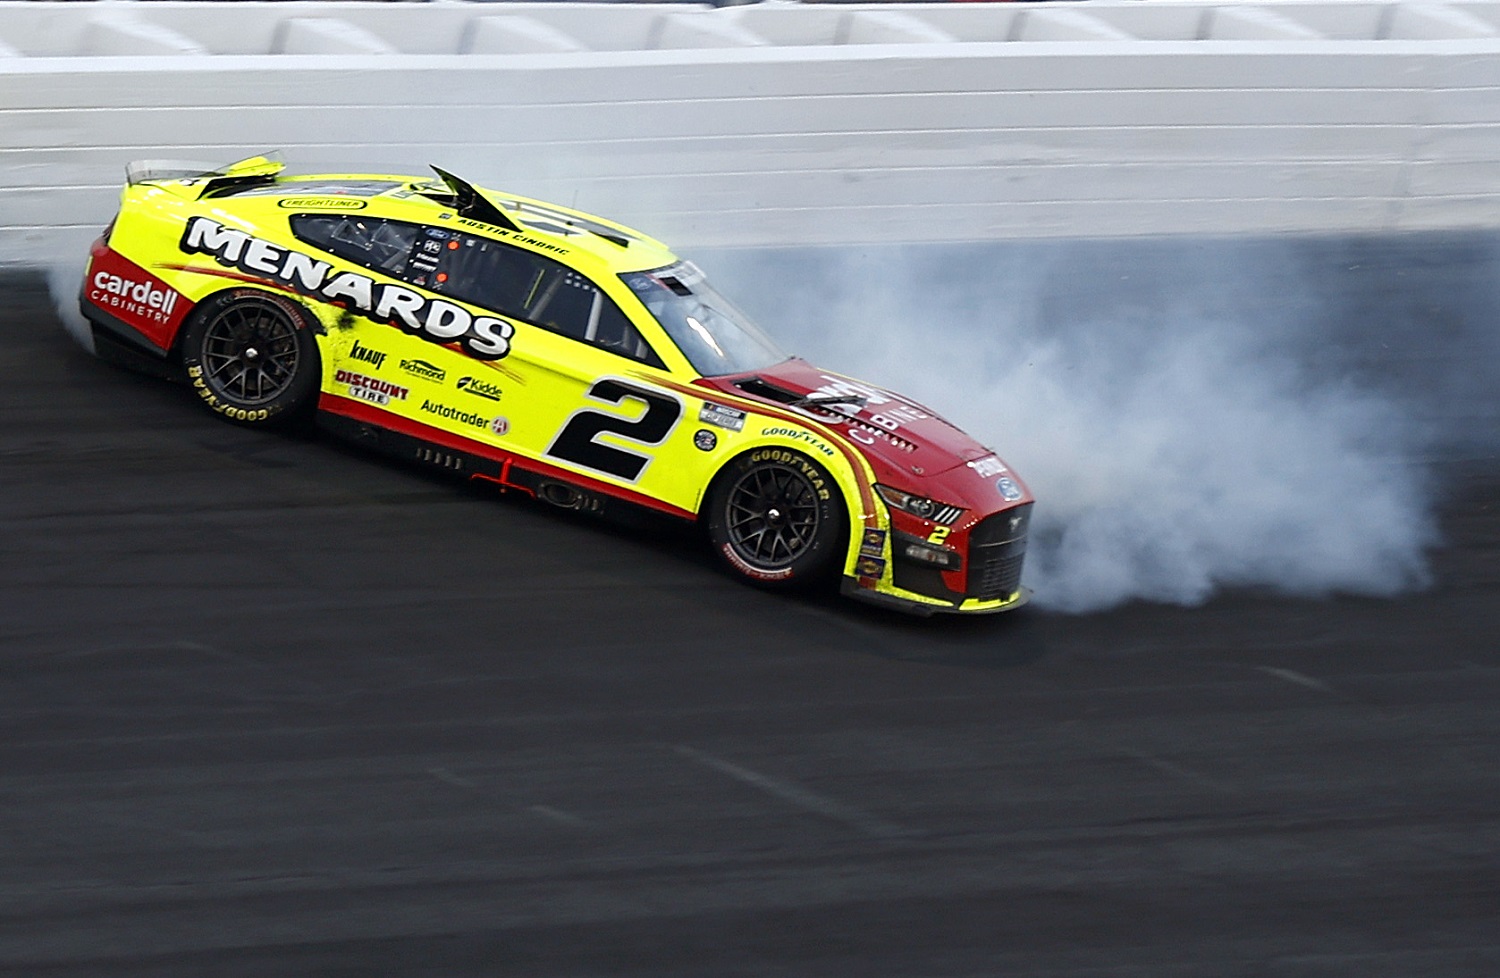 Austin Cindric spins after an on-track incident during the NASCAR Cup Series Coca-Cola 600 at Charlotte Motor Speedway on May 29, 2022.